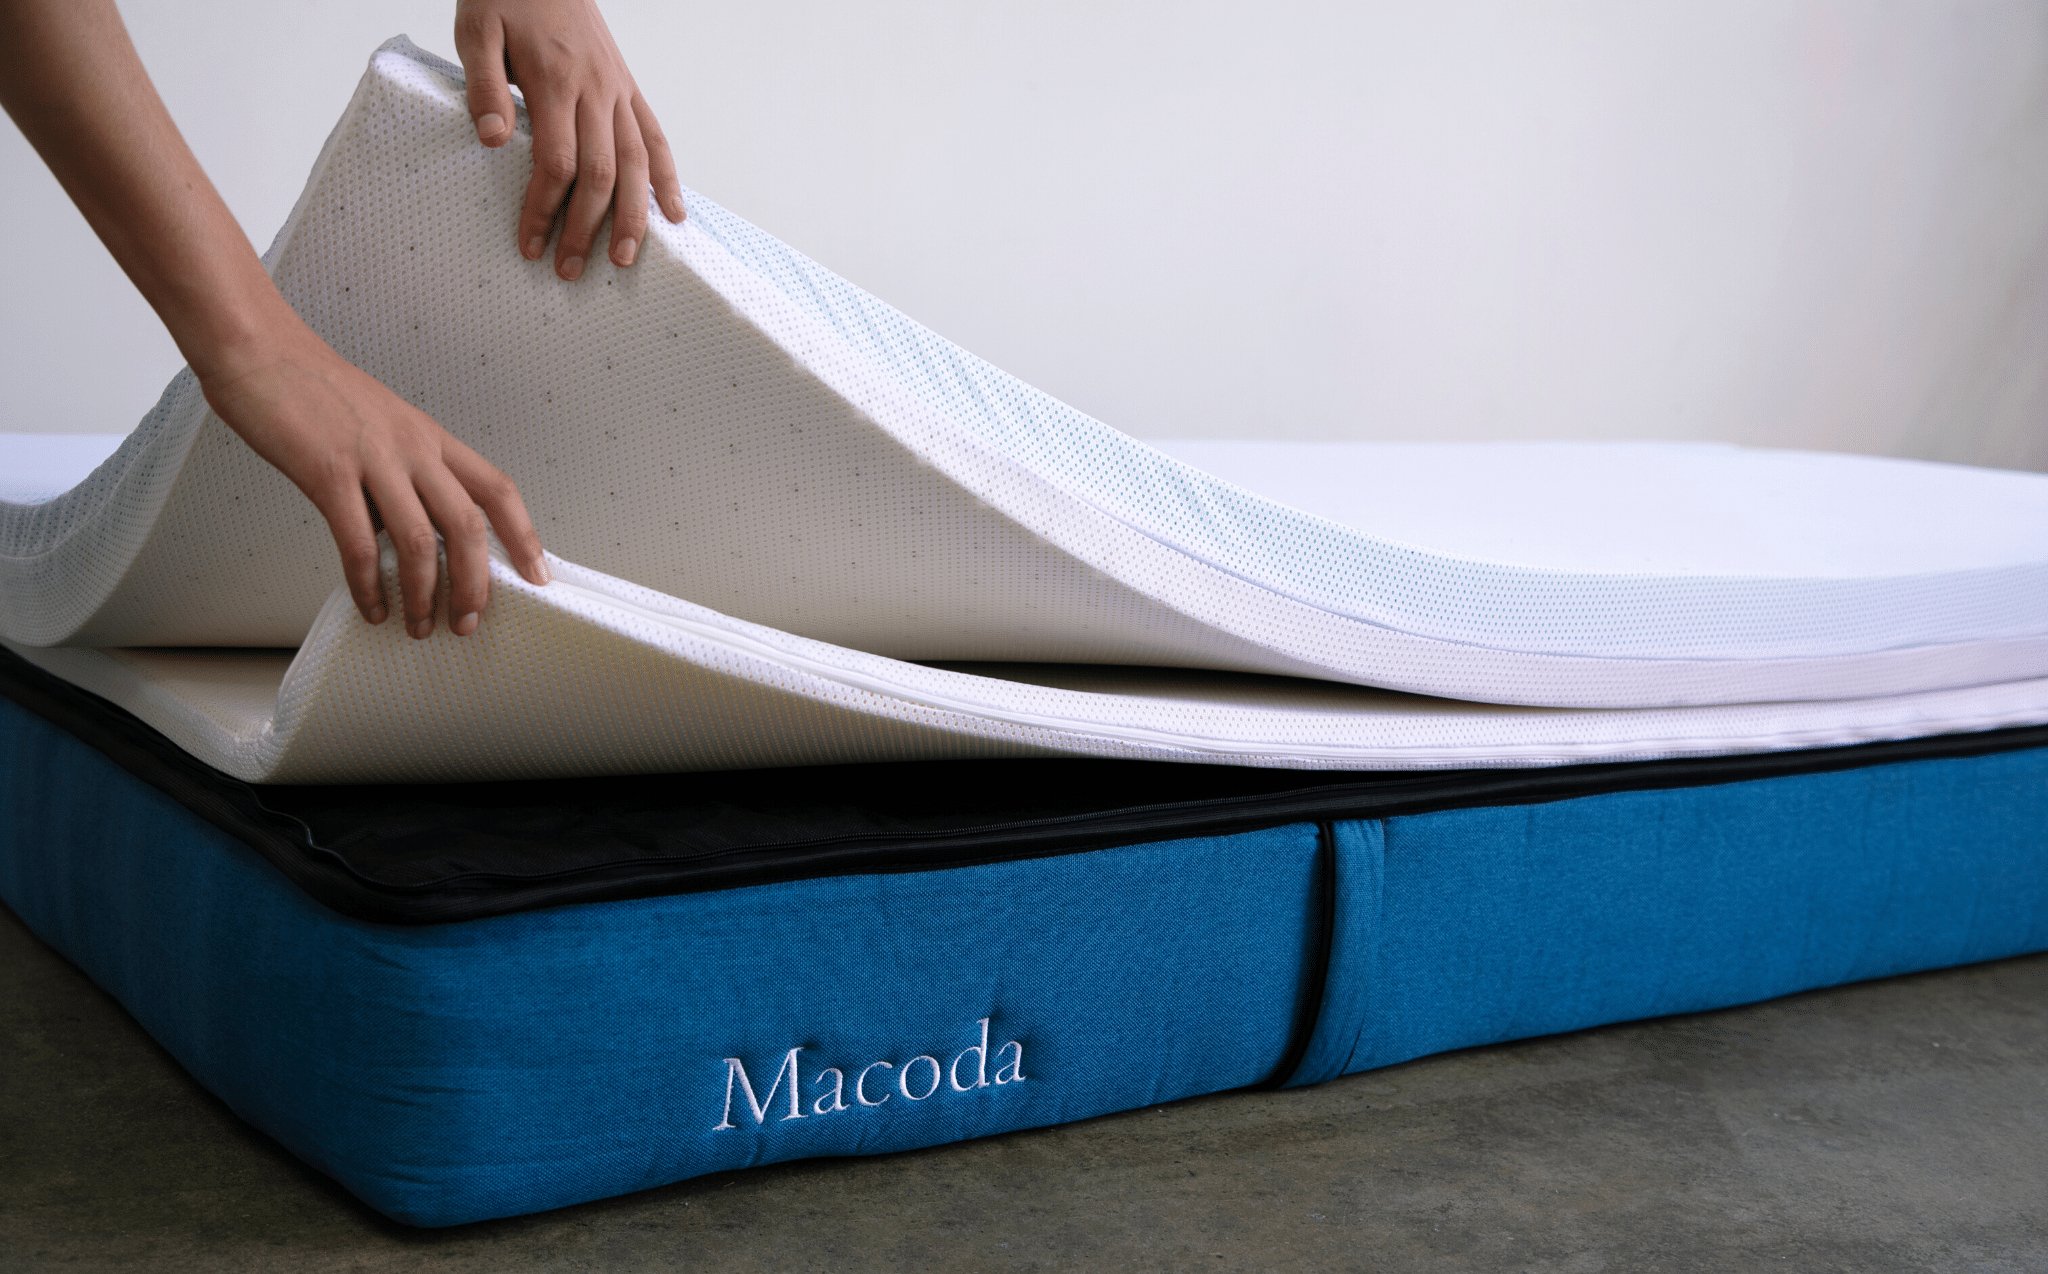 Macoda makes one of the best mattress in a box products in Australia.